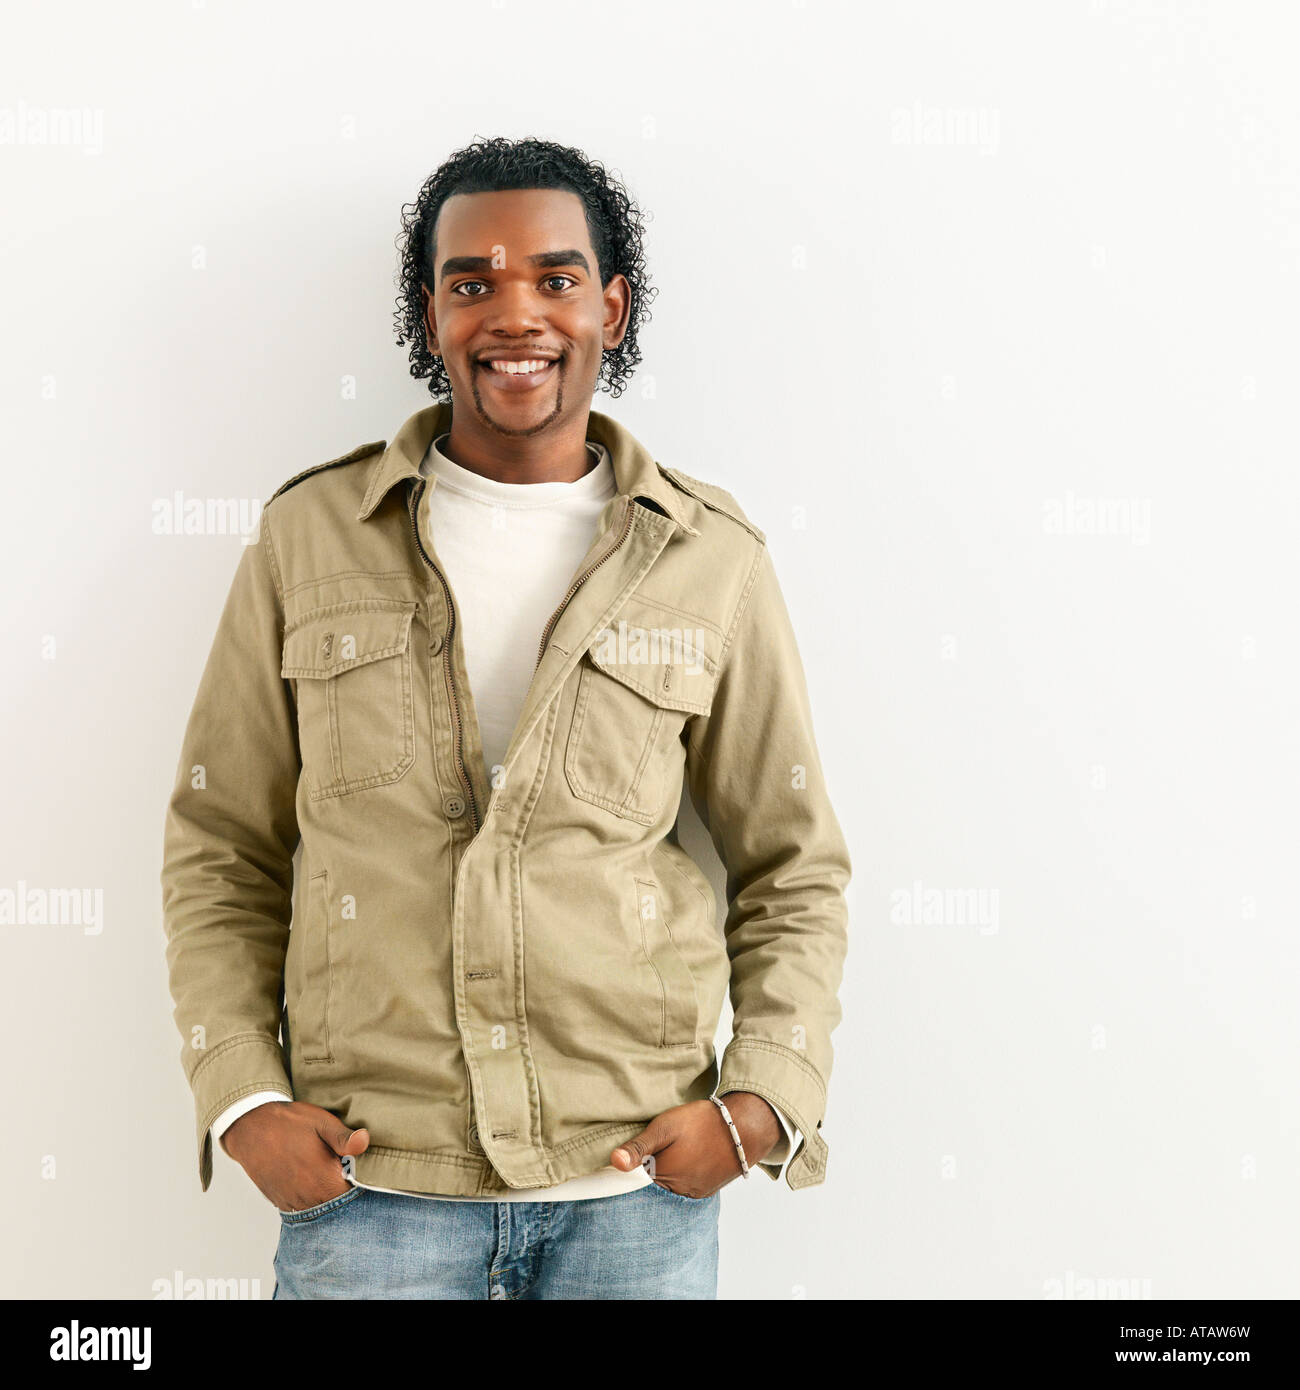 Portrait of smiling man standing against white background Stock Photo